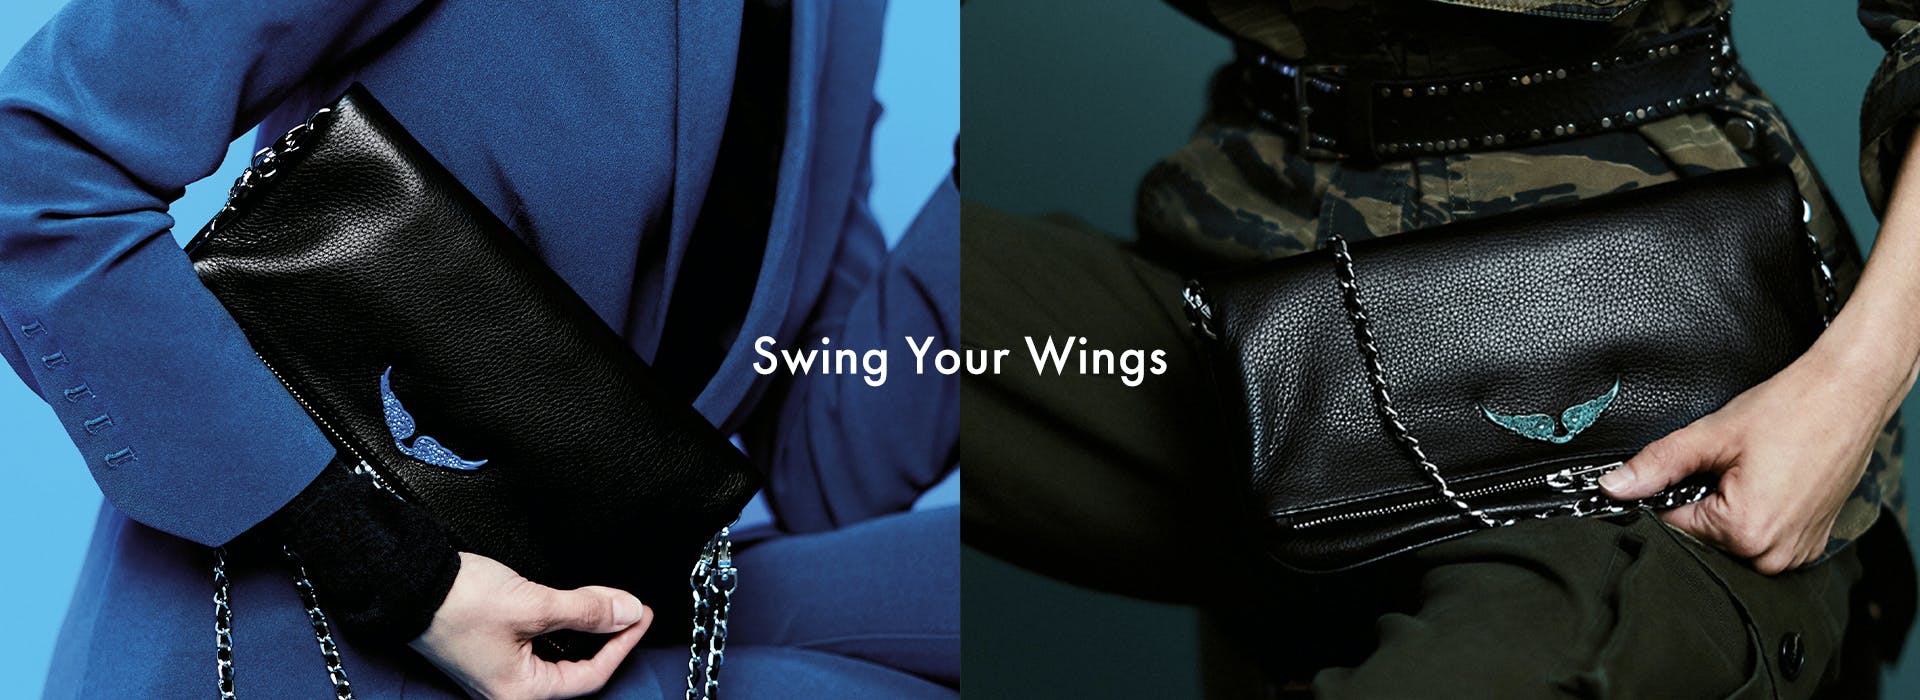 SWING_YOUR_WINGS